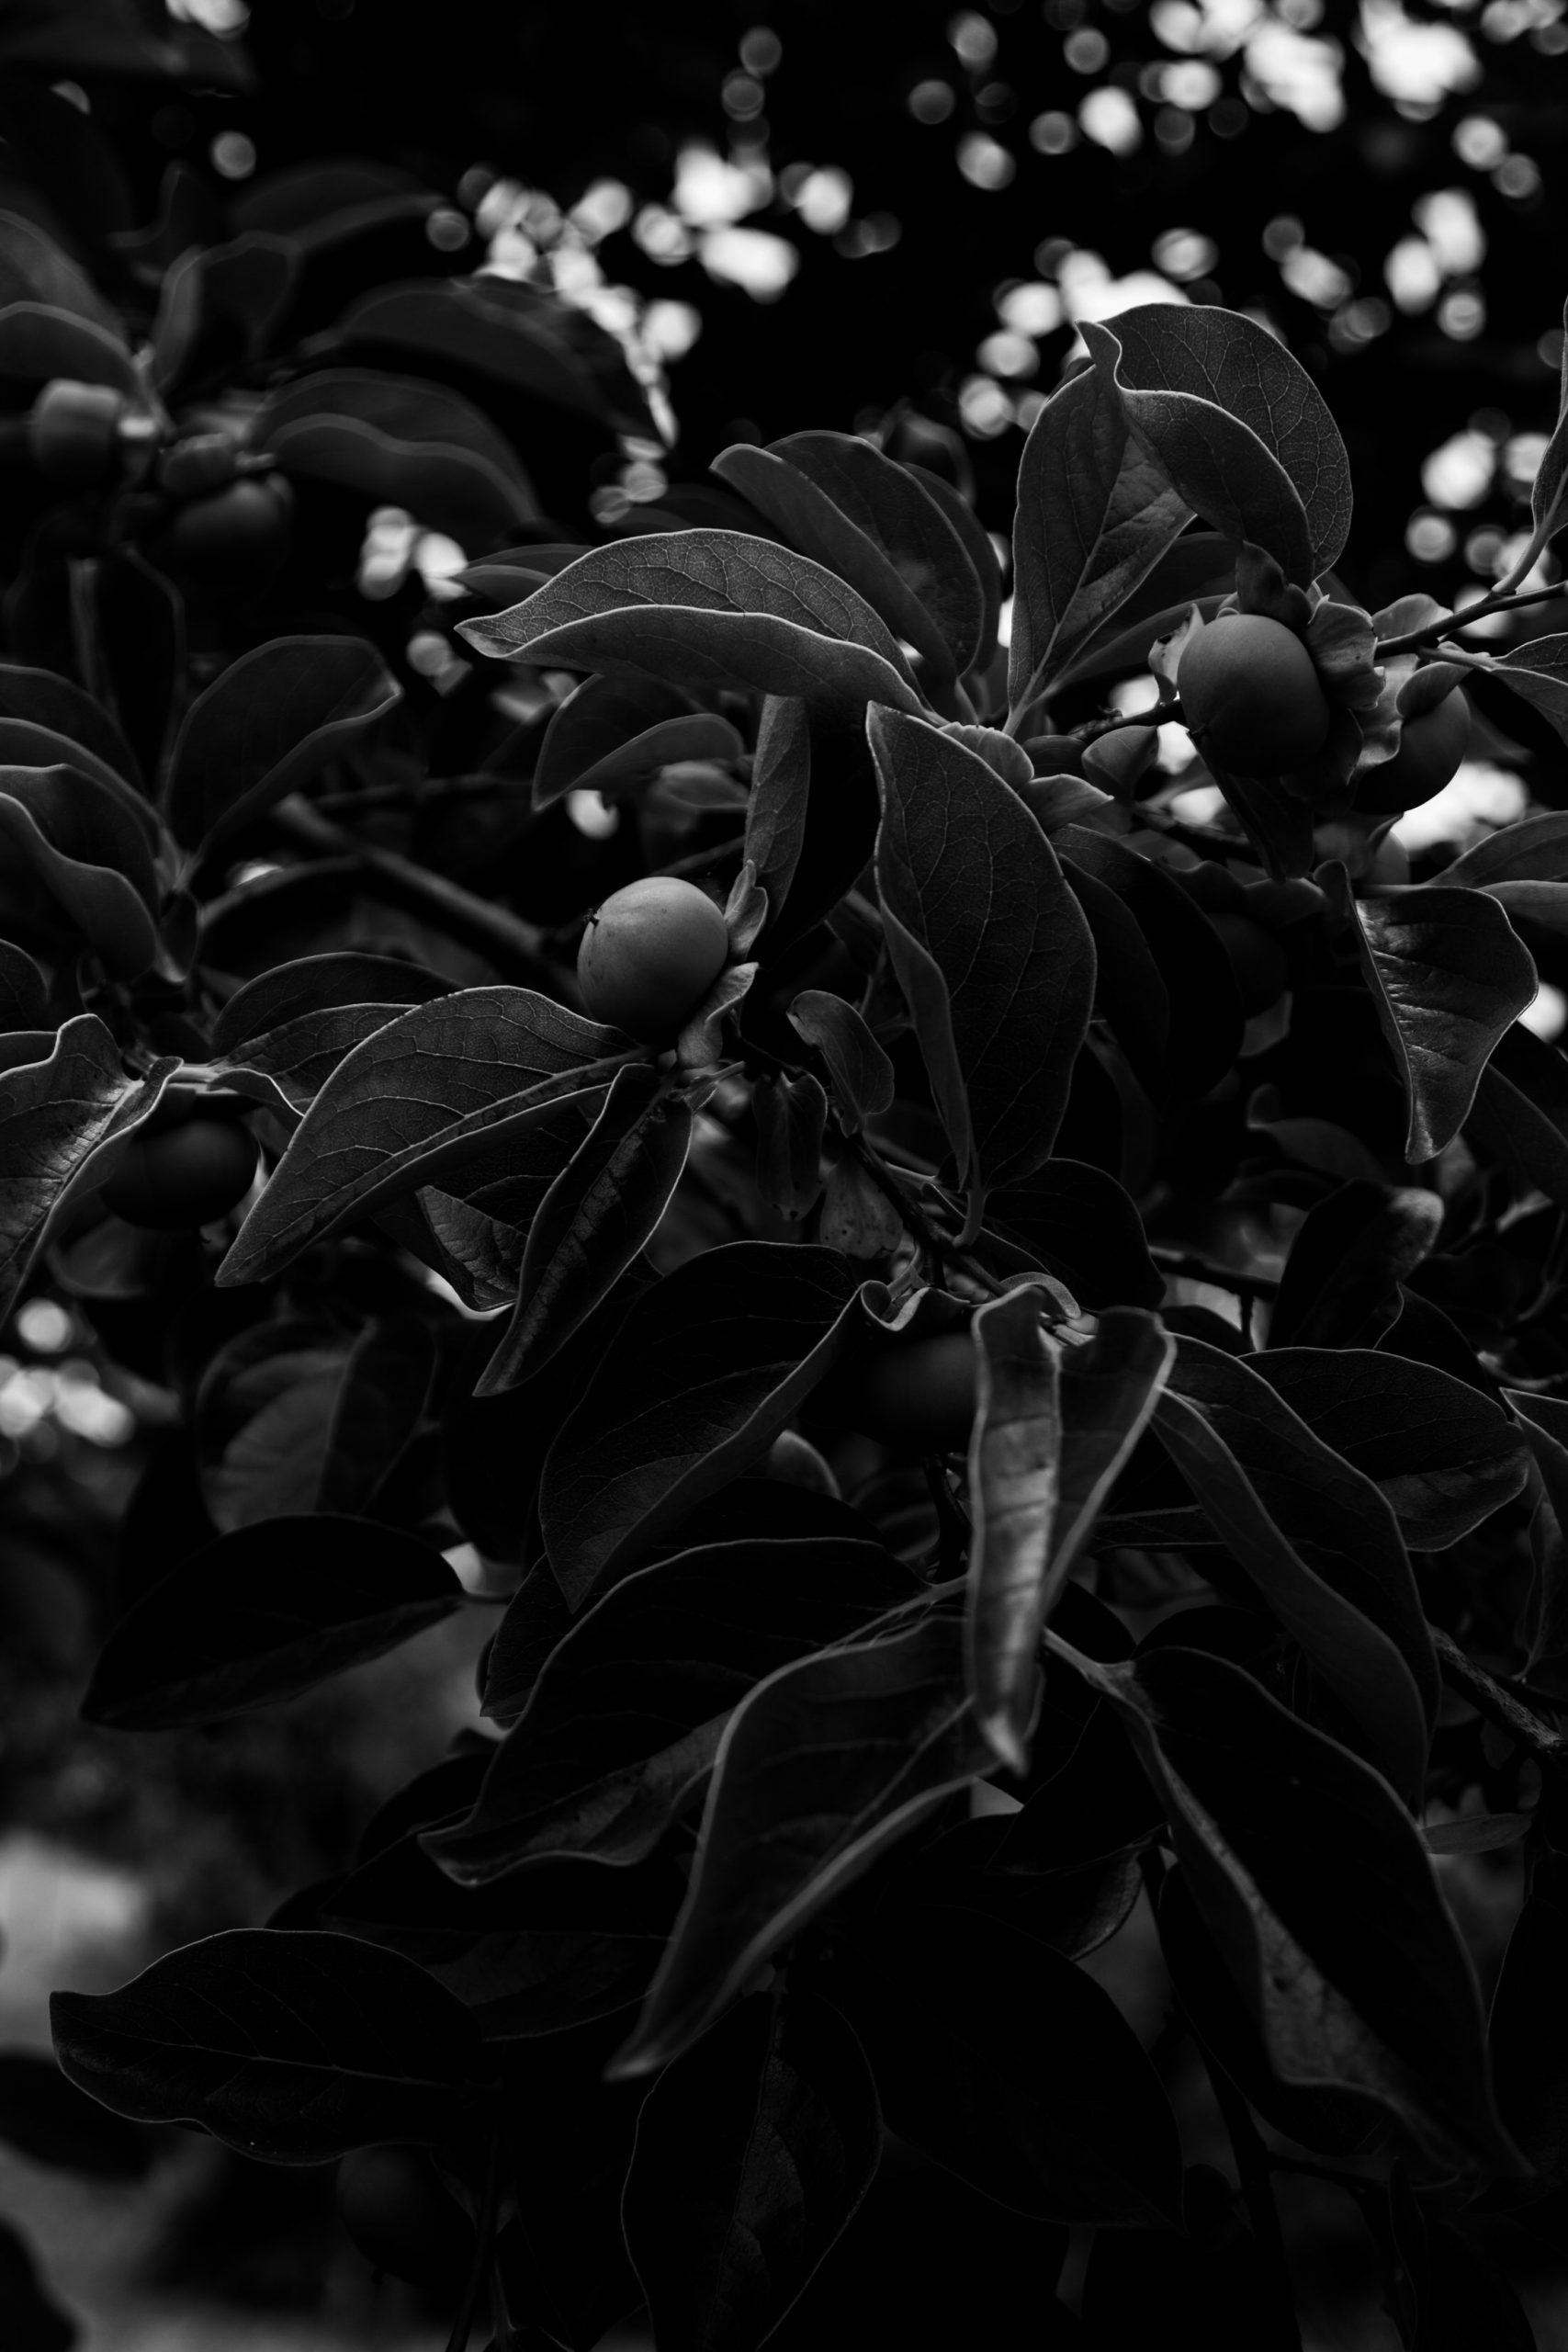 black and white image of two persimmons hanging in a tree